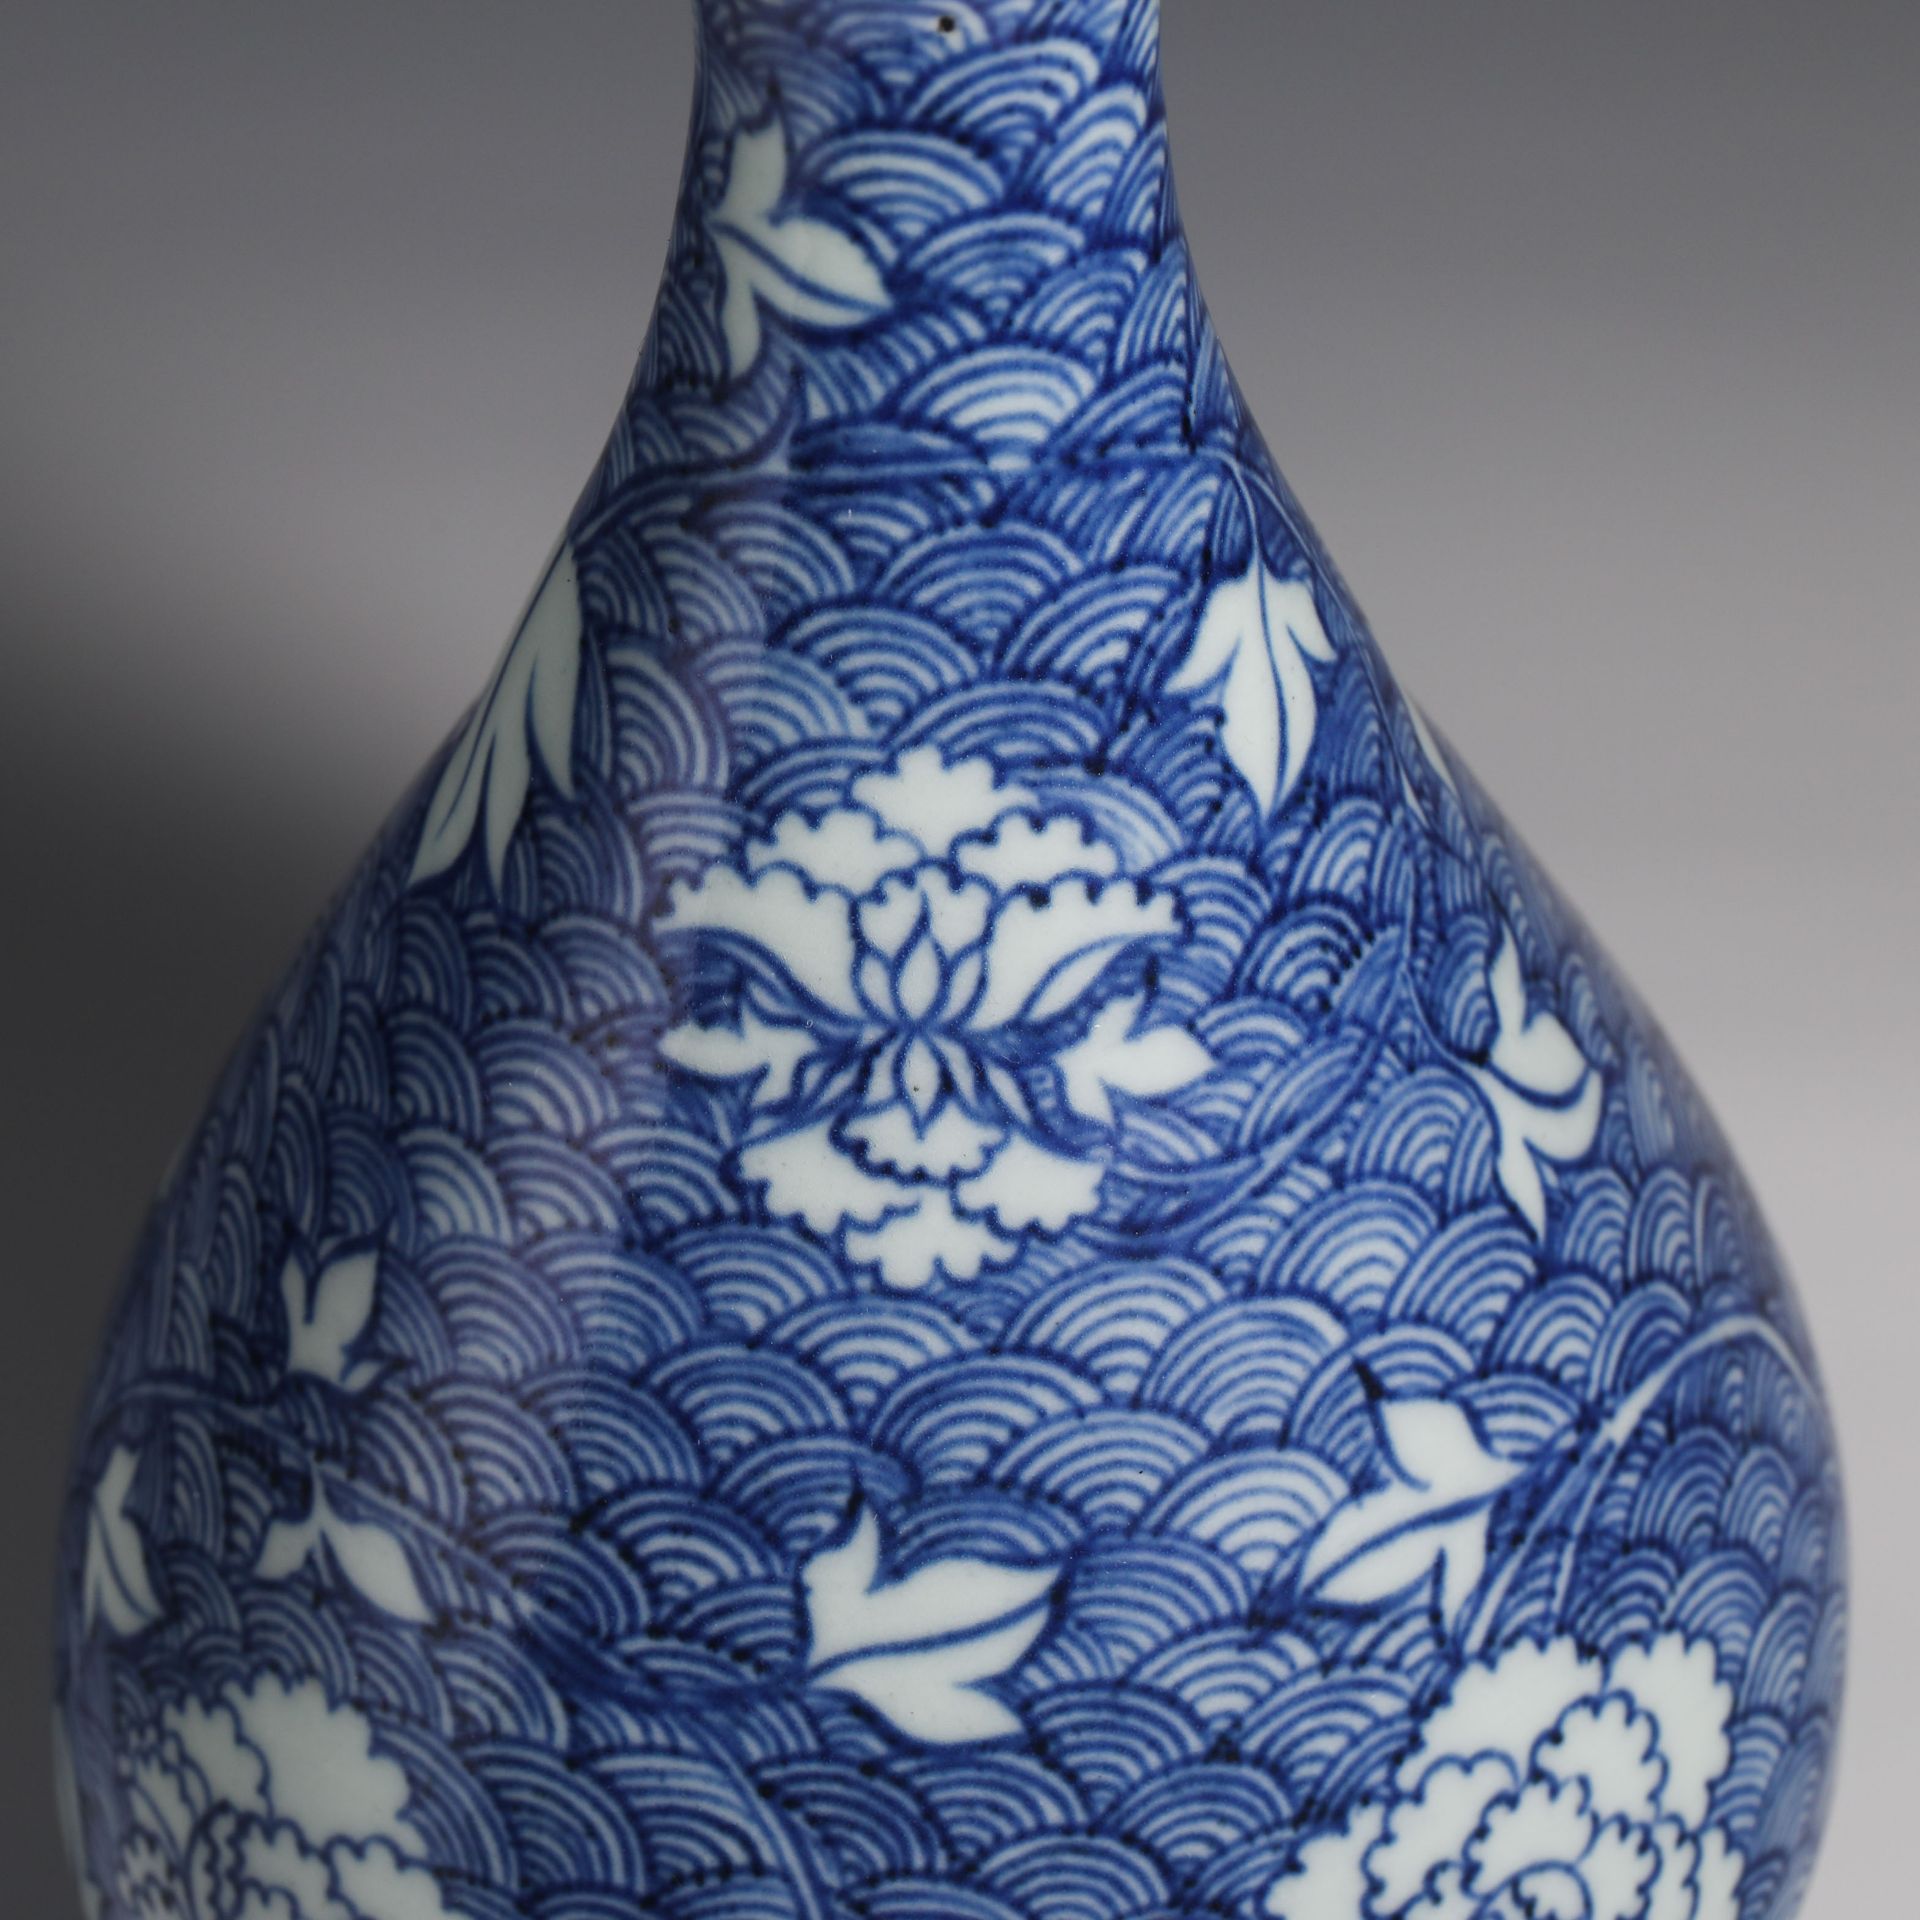 16th Century Blue and White Flower Pattern Jade Pot Spring Vase - Image 2 of 10